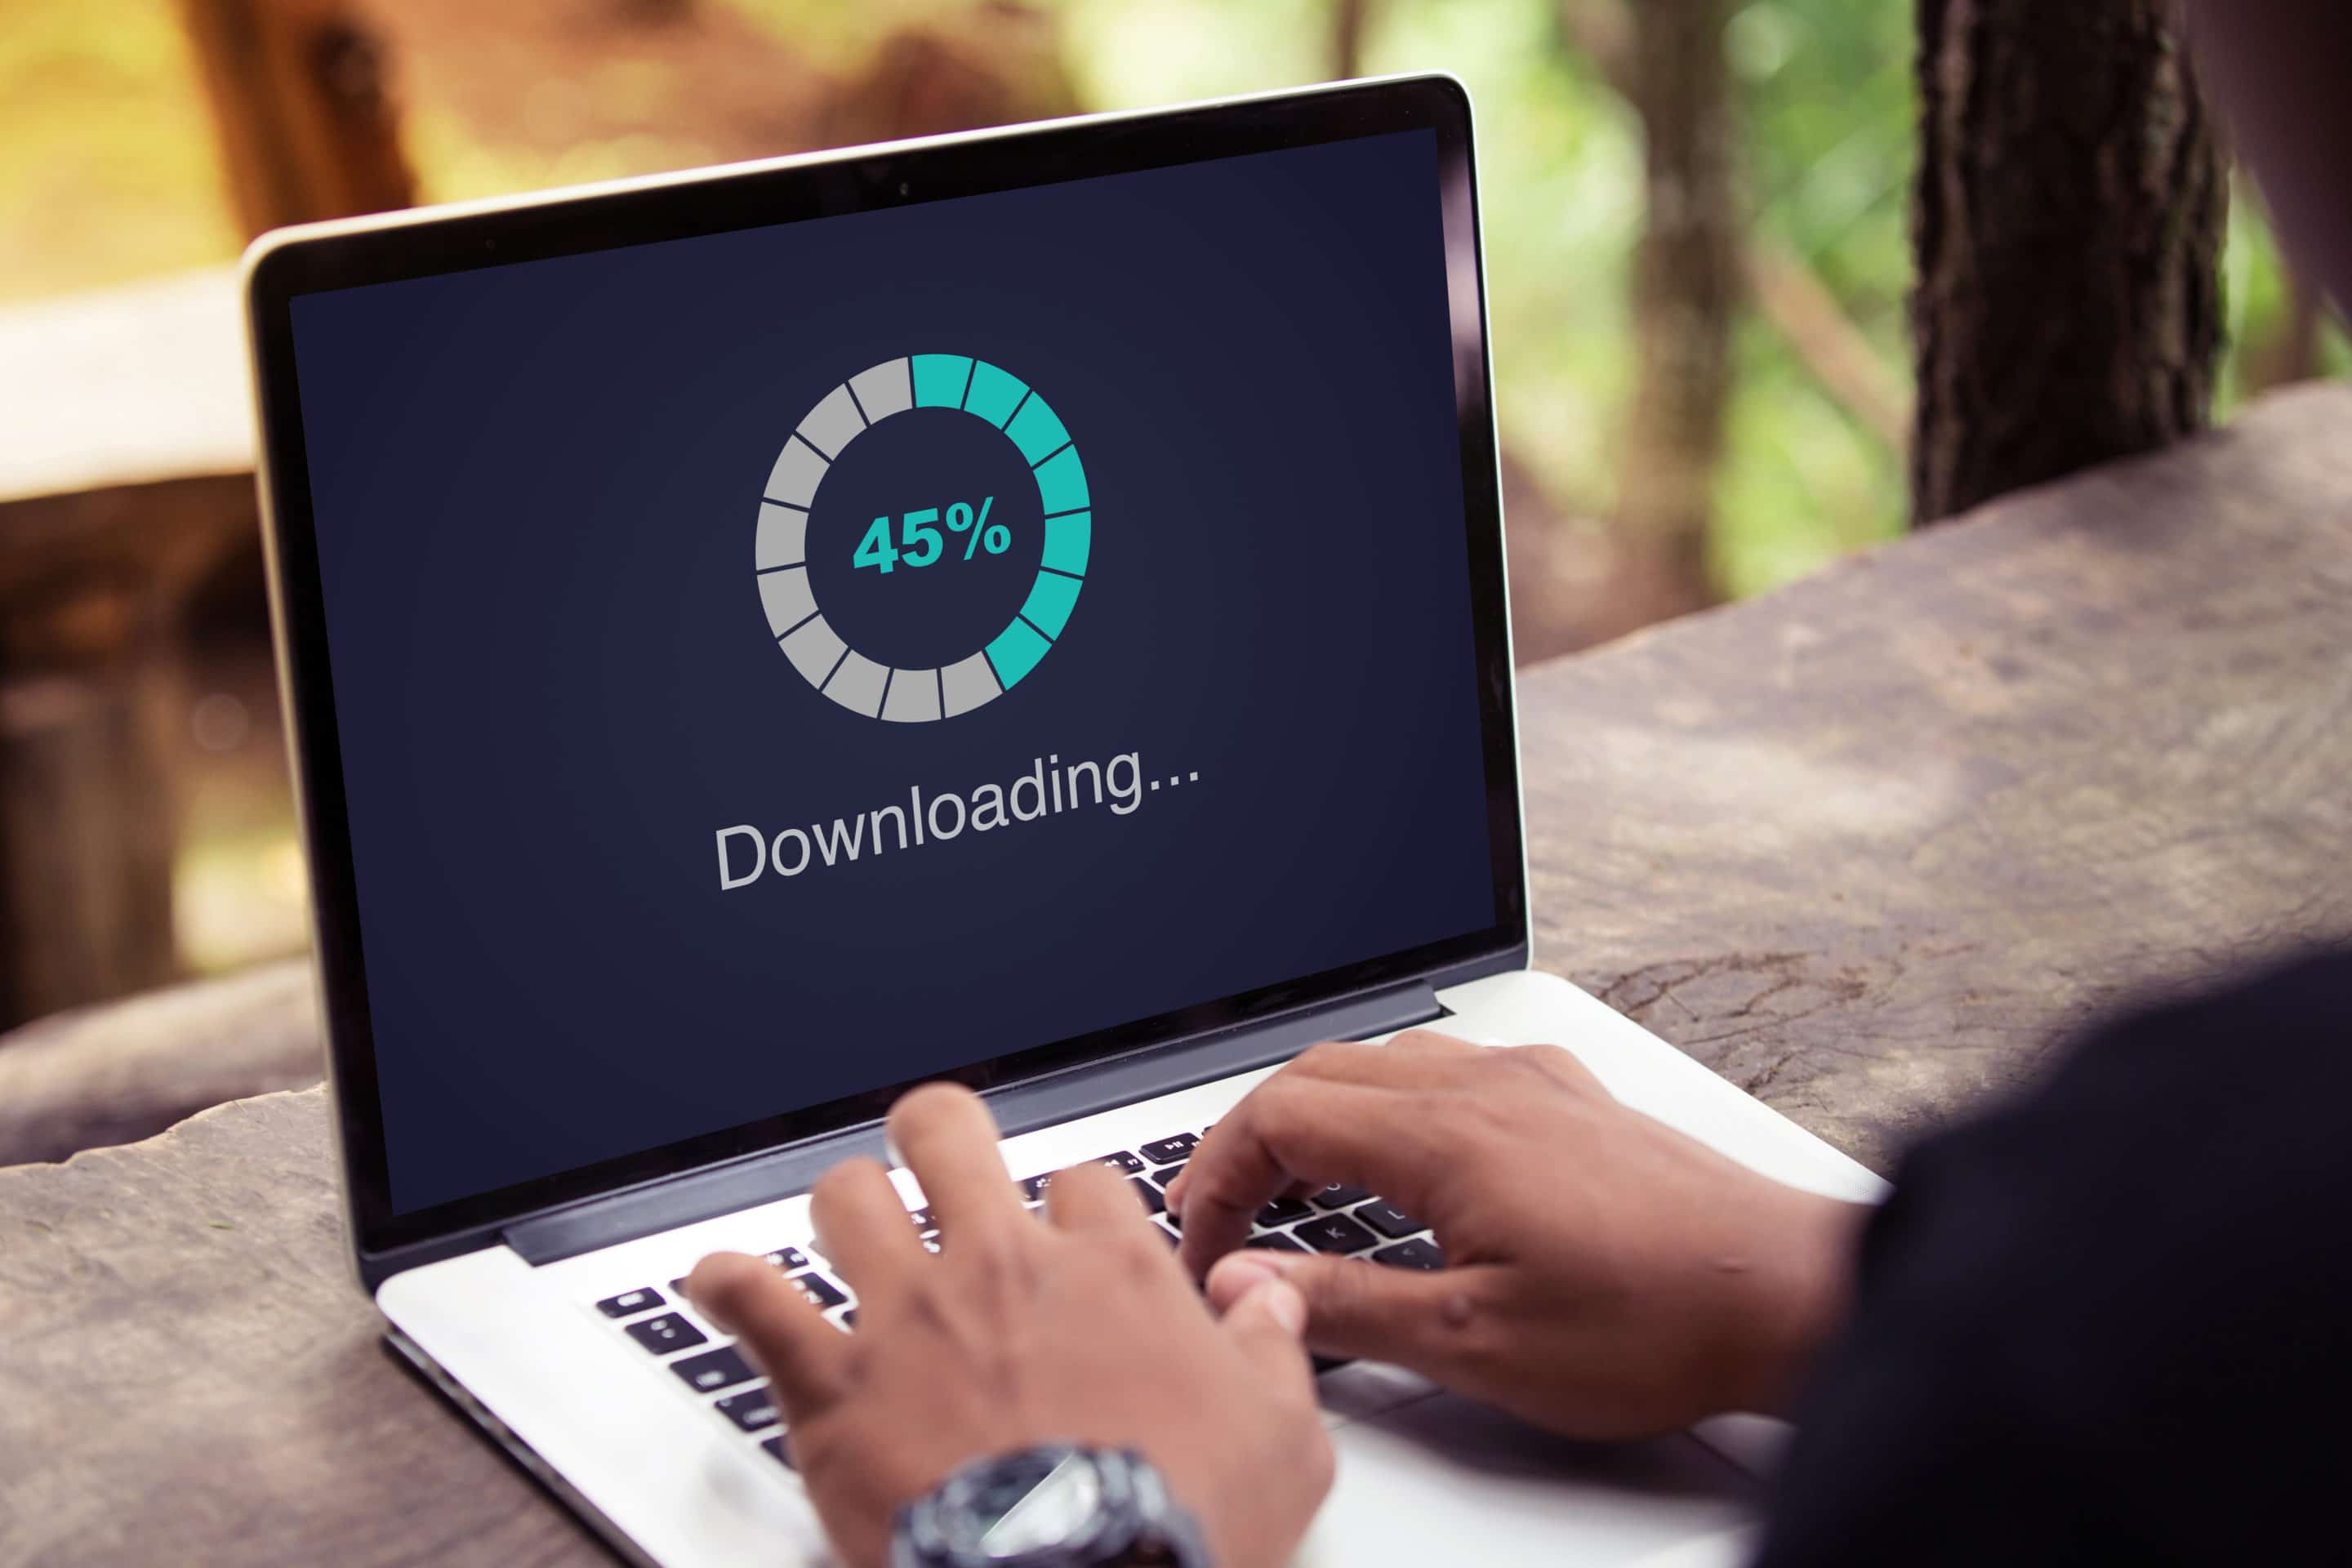 Downloading percentage on a laptop screen